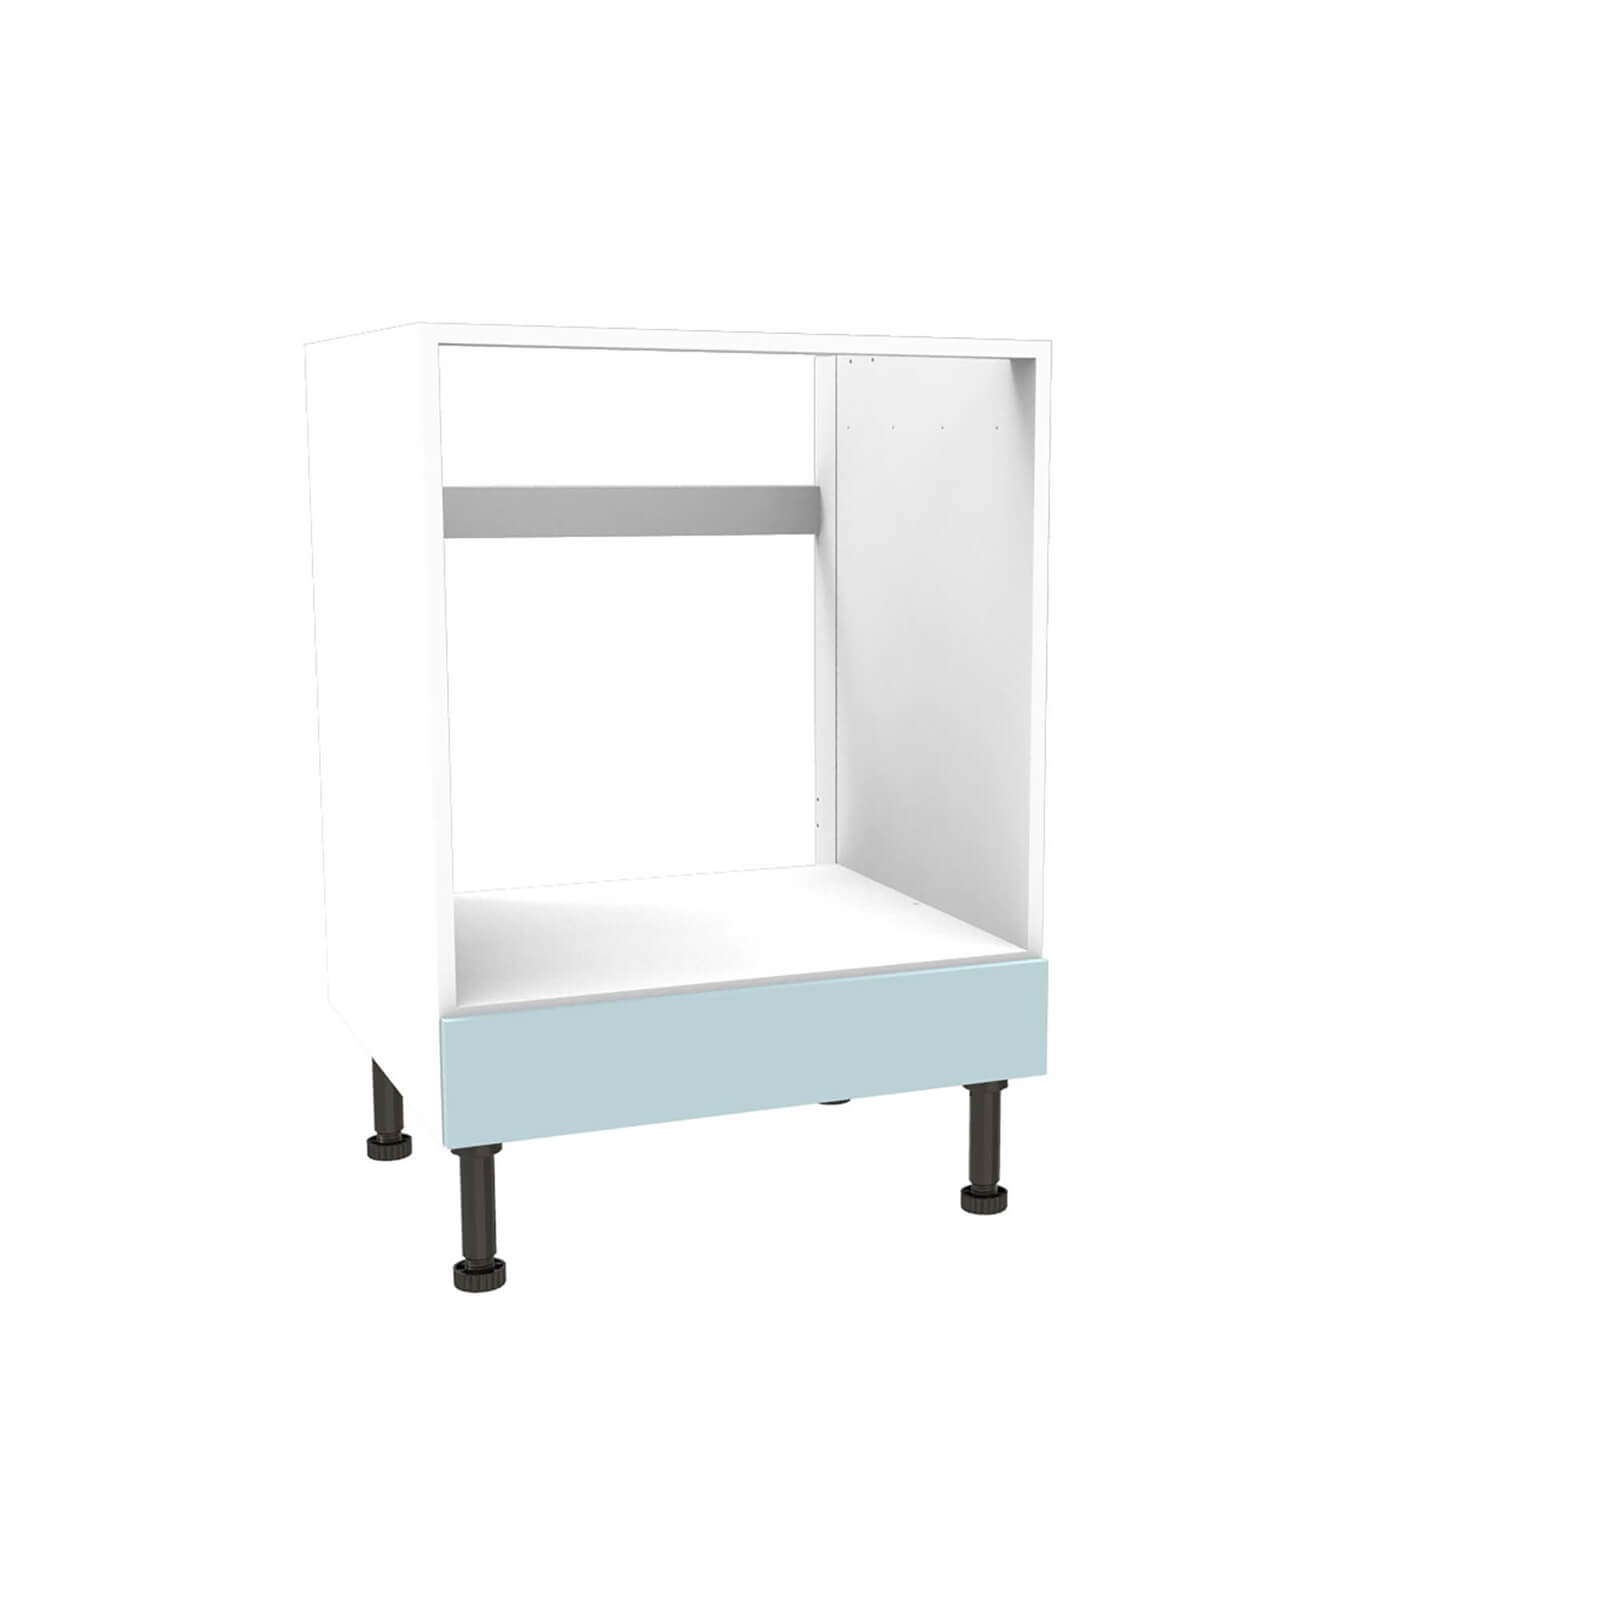 Country Light Blue 600mm Built-in Oven Housing Unit